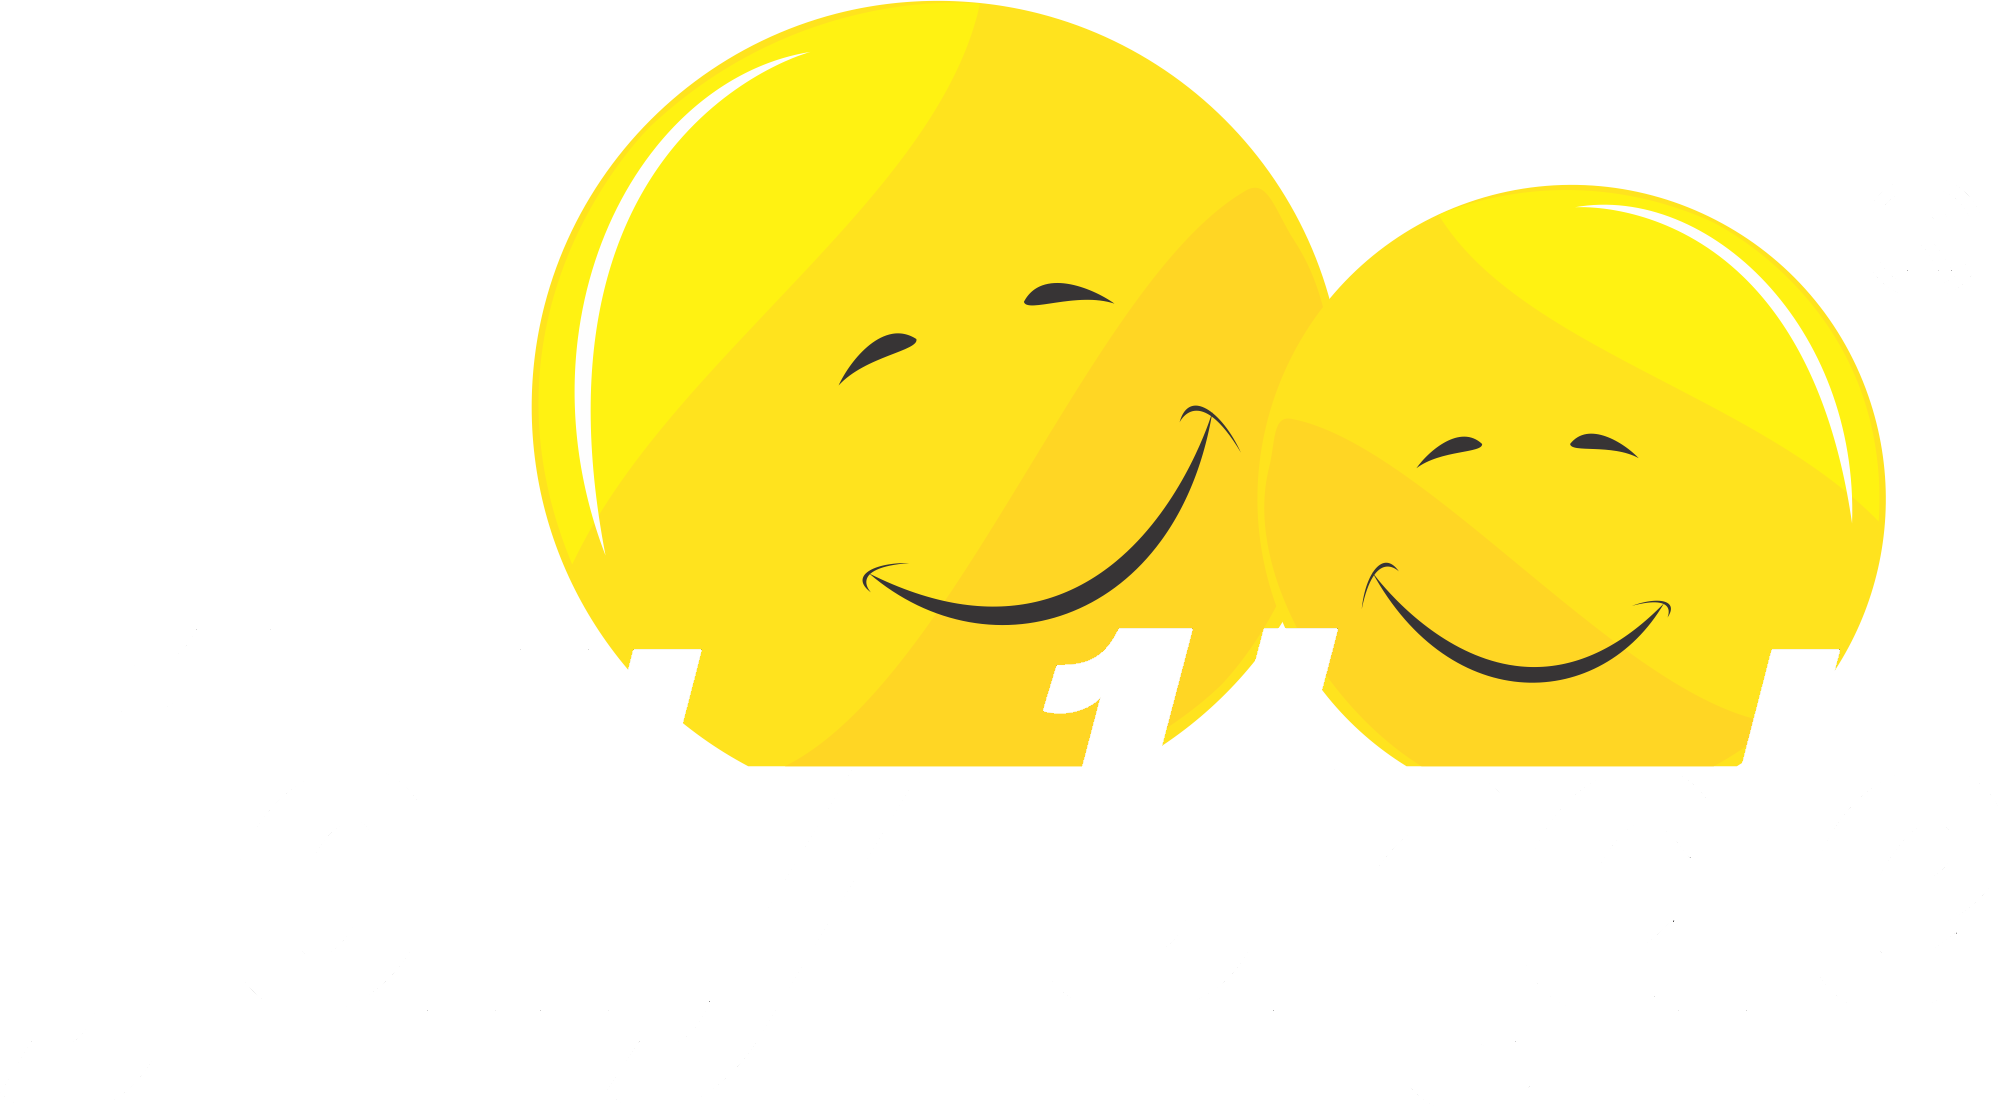 JOLLY UNCLE